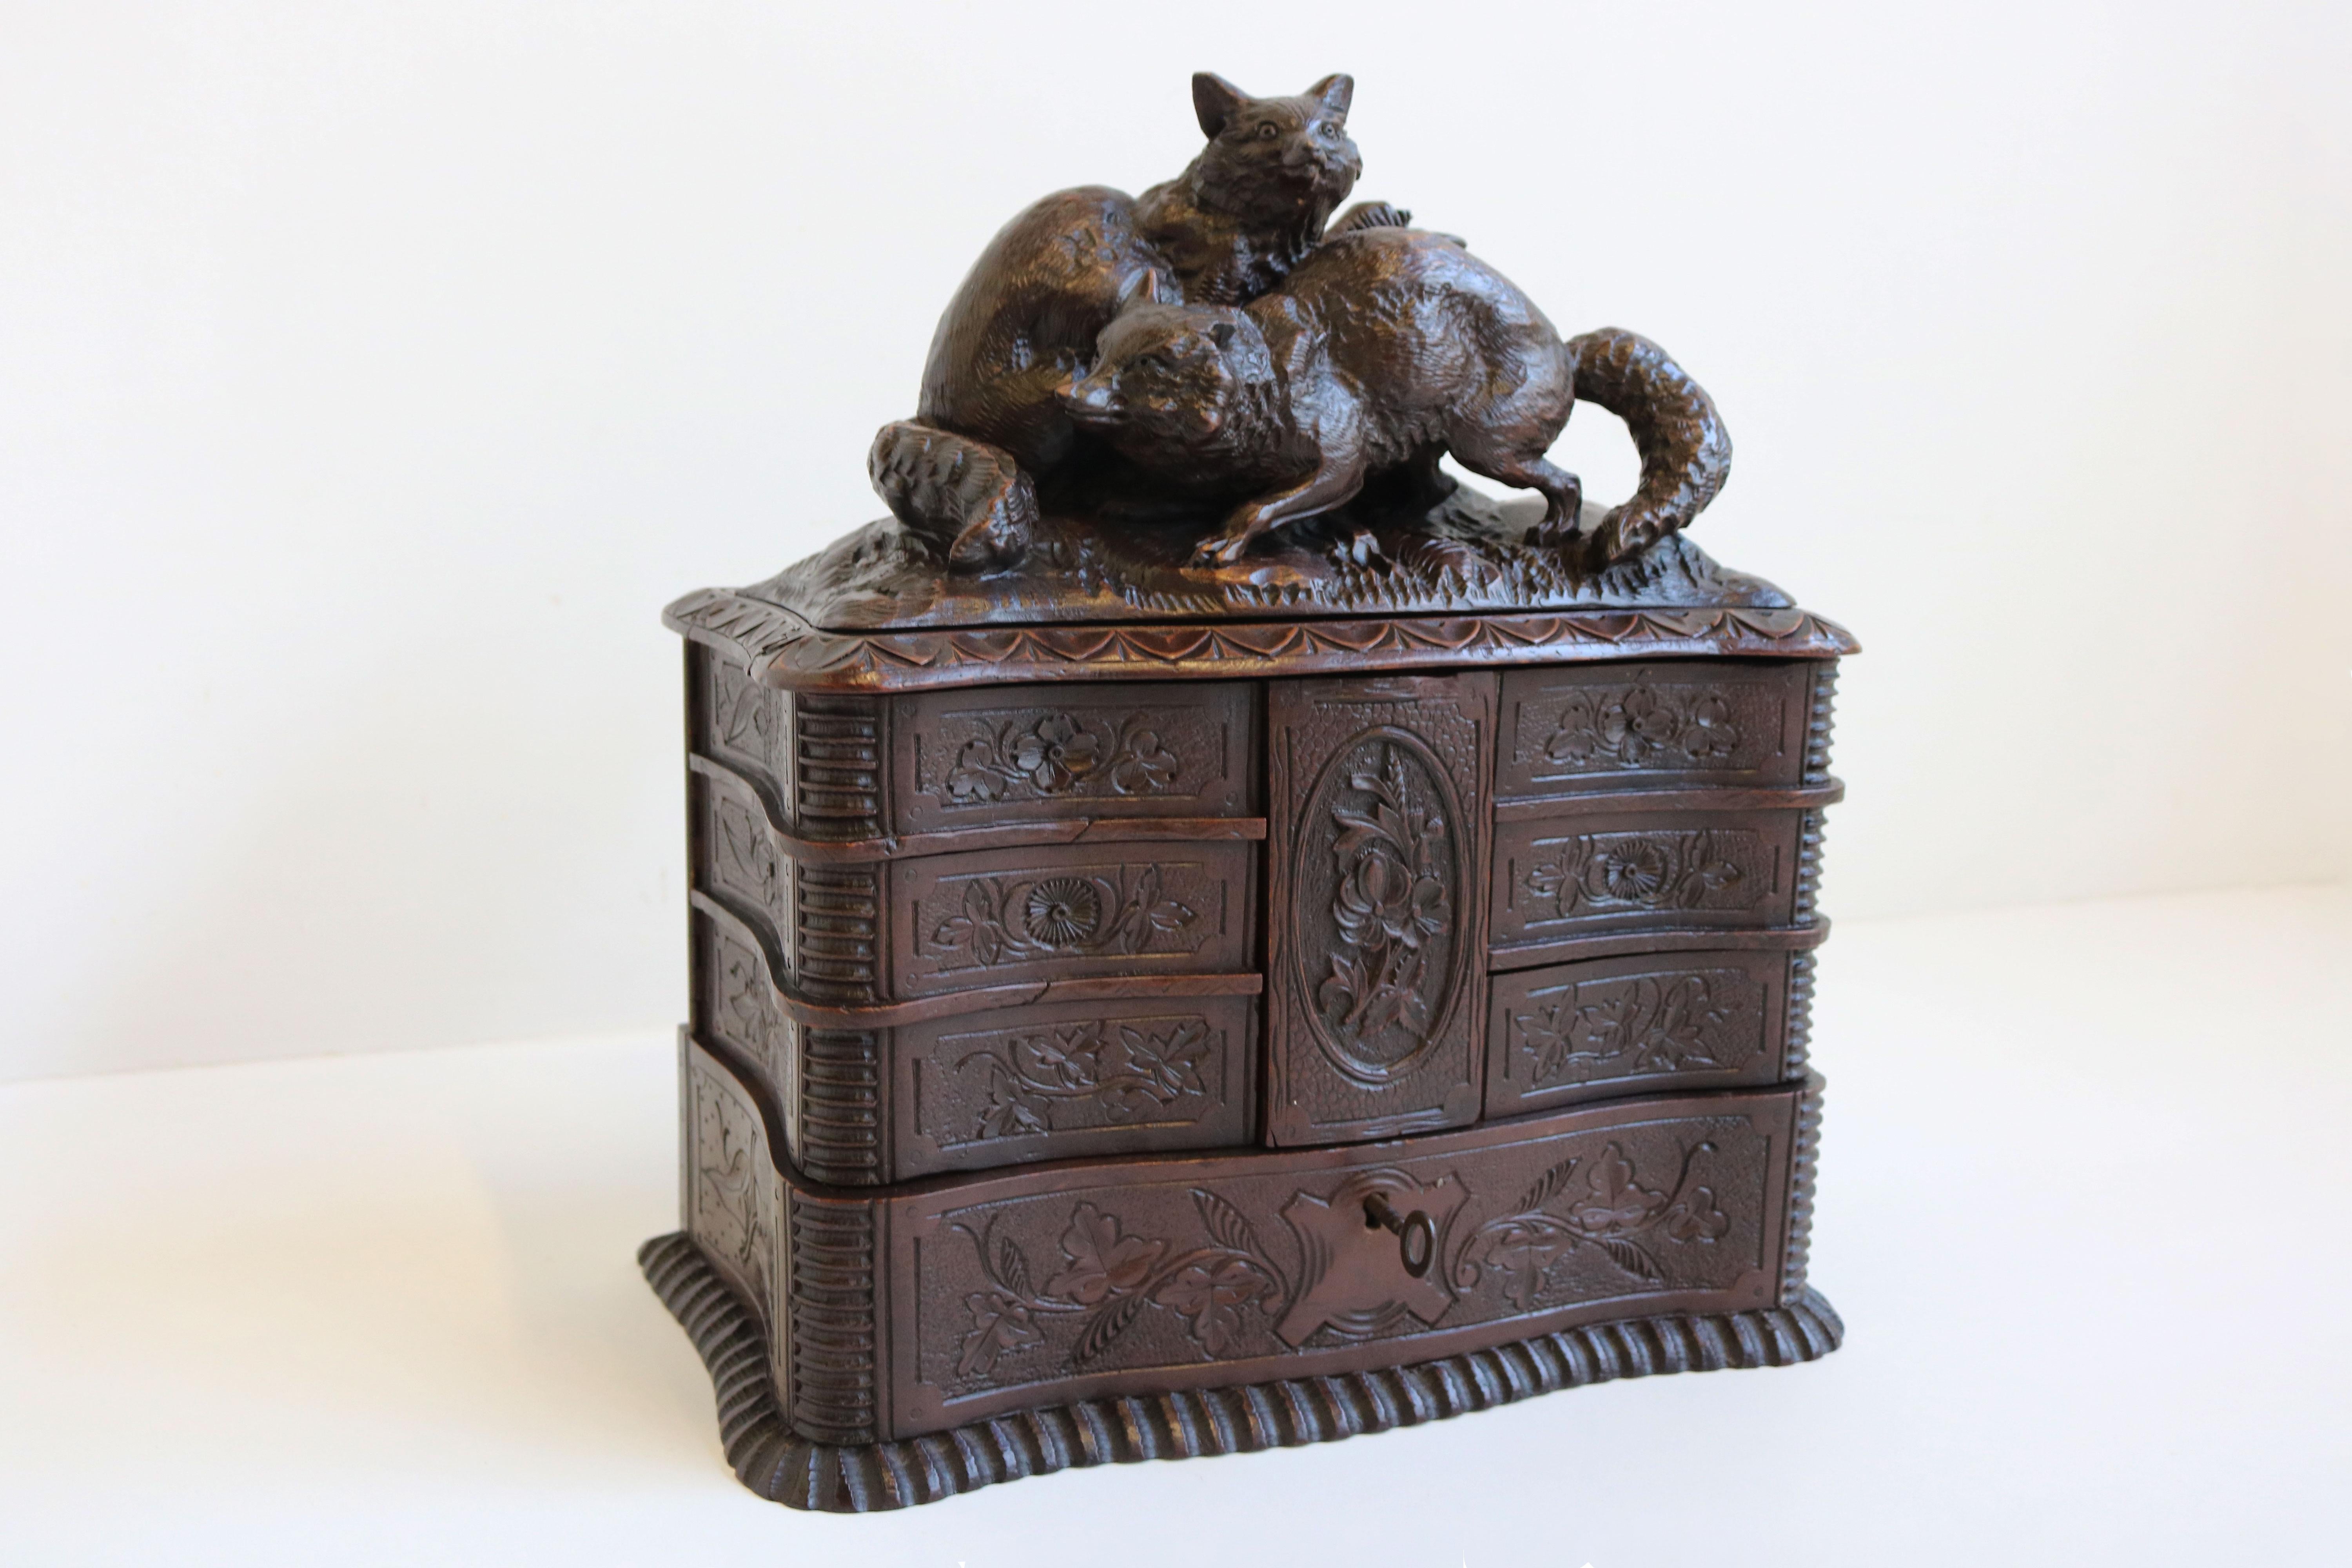 Swiss Rare Antique 4 Tier Black Forest Jewelry Box Fruitwood 19th Century Hand Carved For Sale